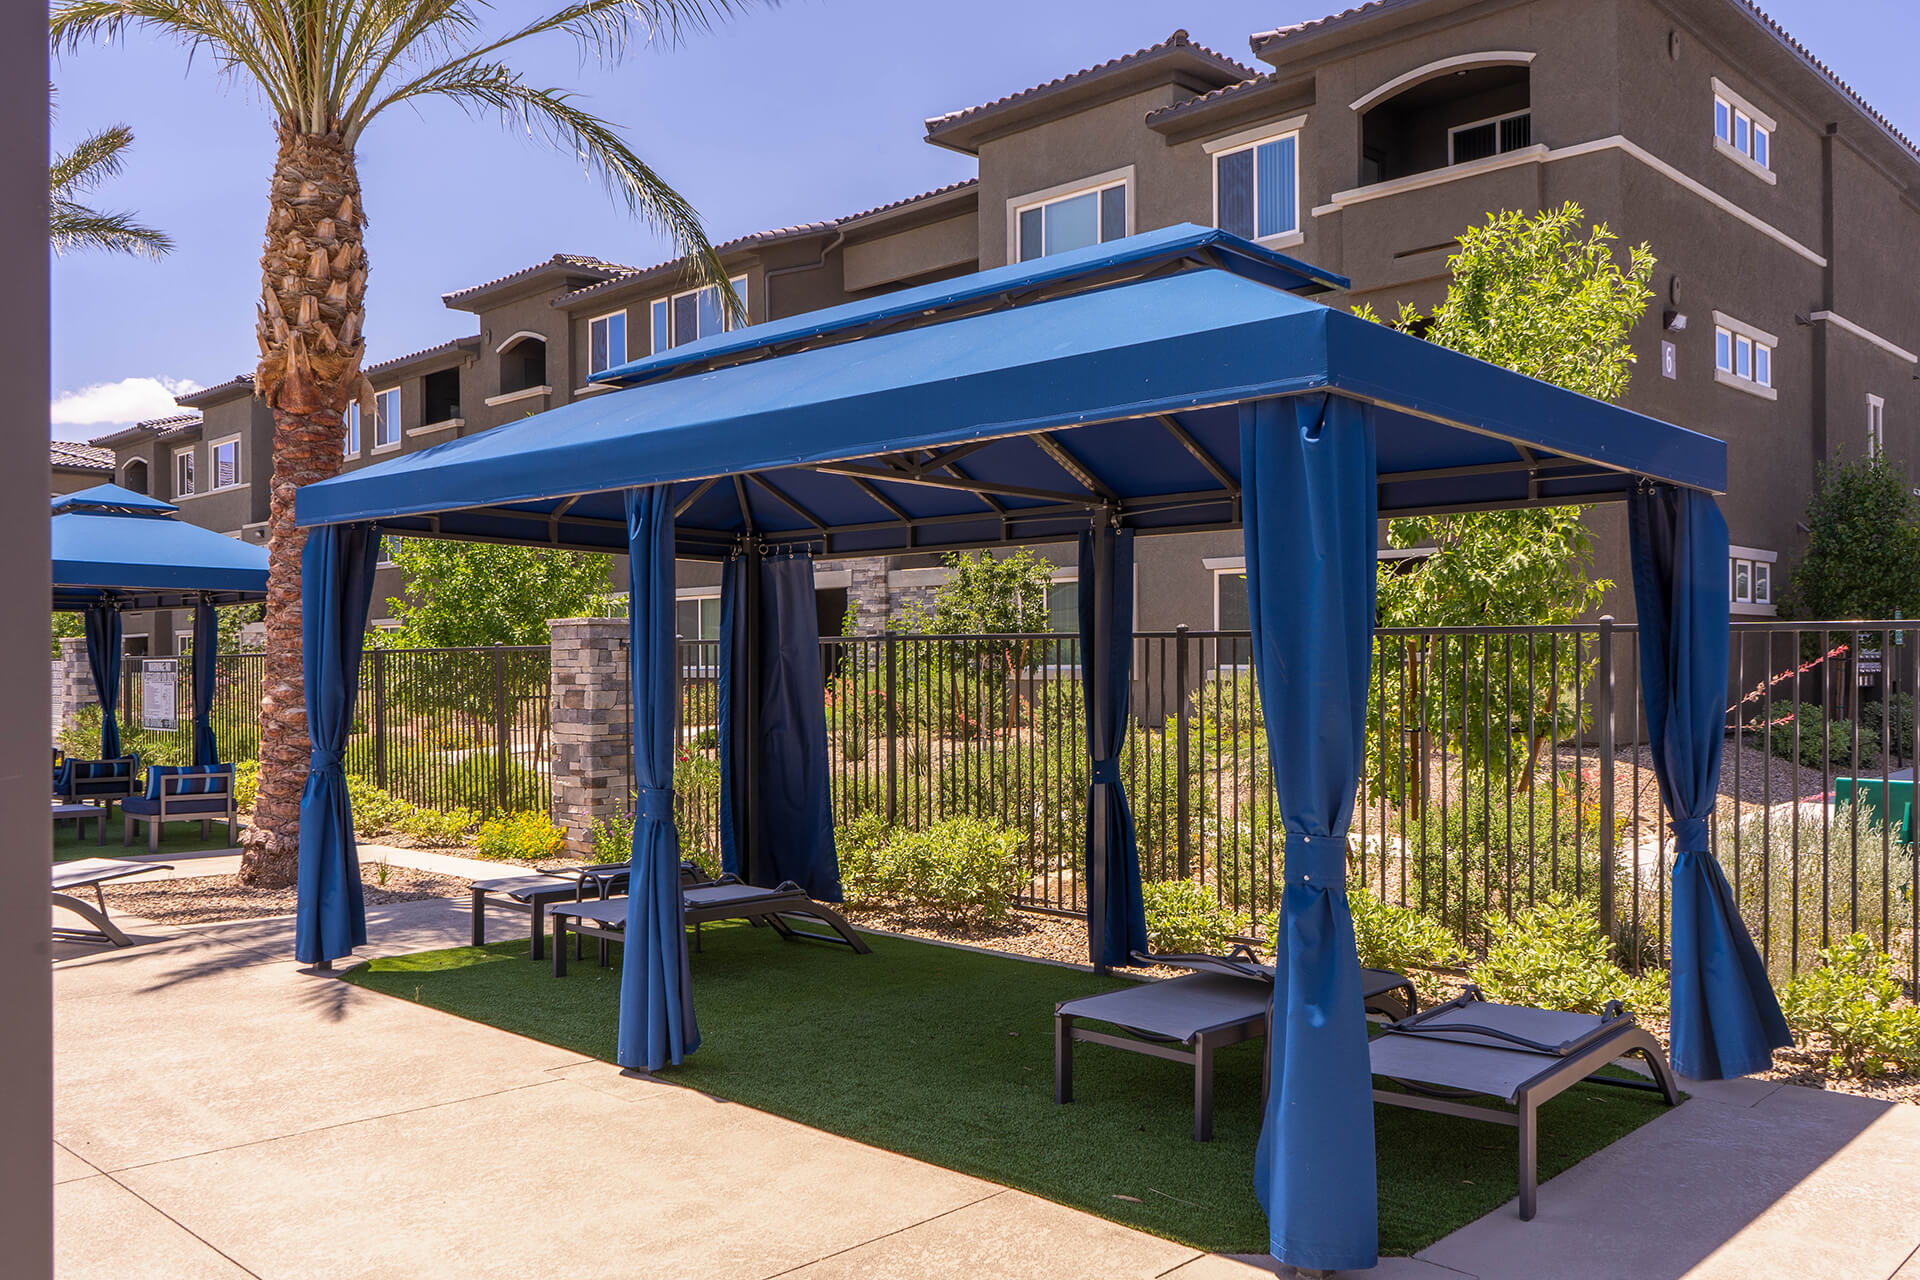 Poolside Awnings at Level 25 Apartments in Las Vegas, Nevada - Cabanas Fabricated by Metro Awnings of Southern, Nevada